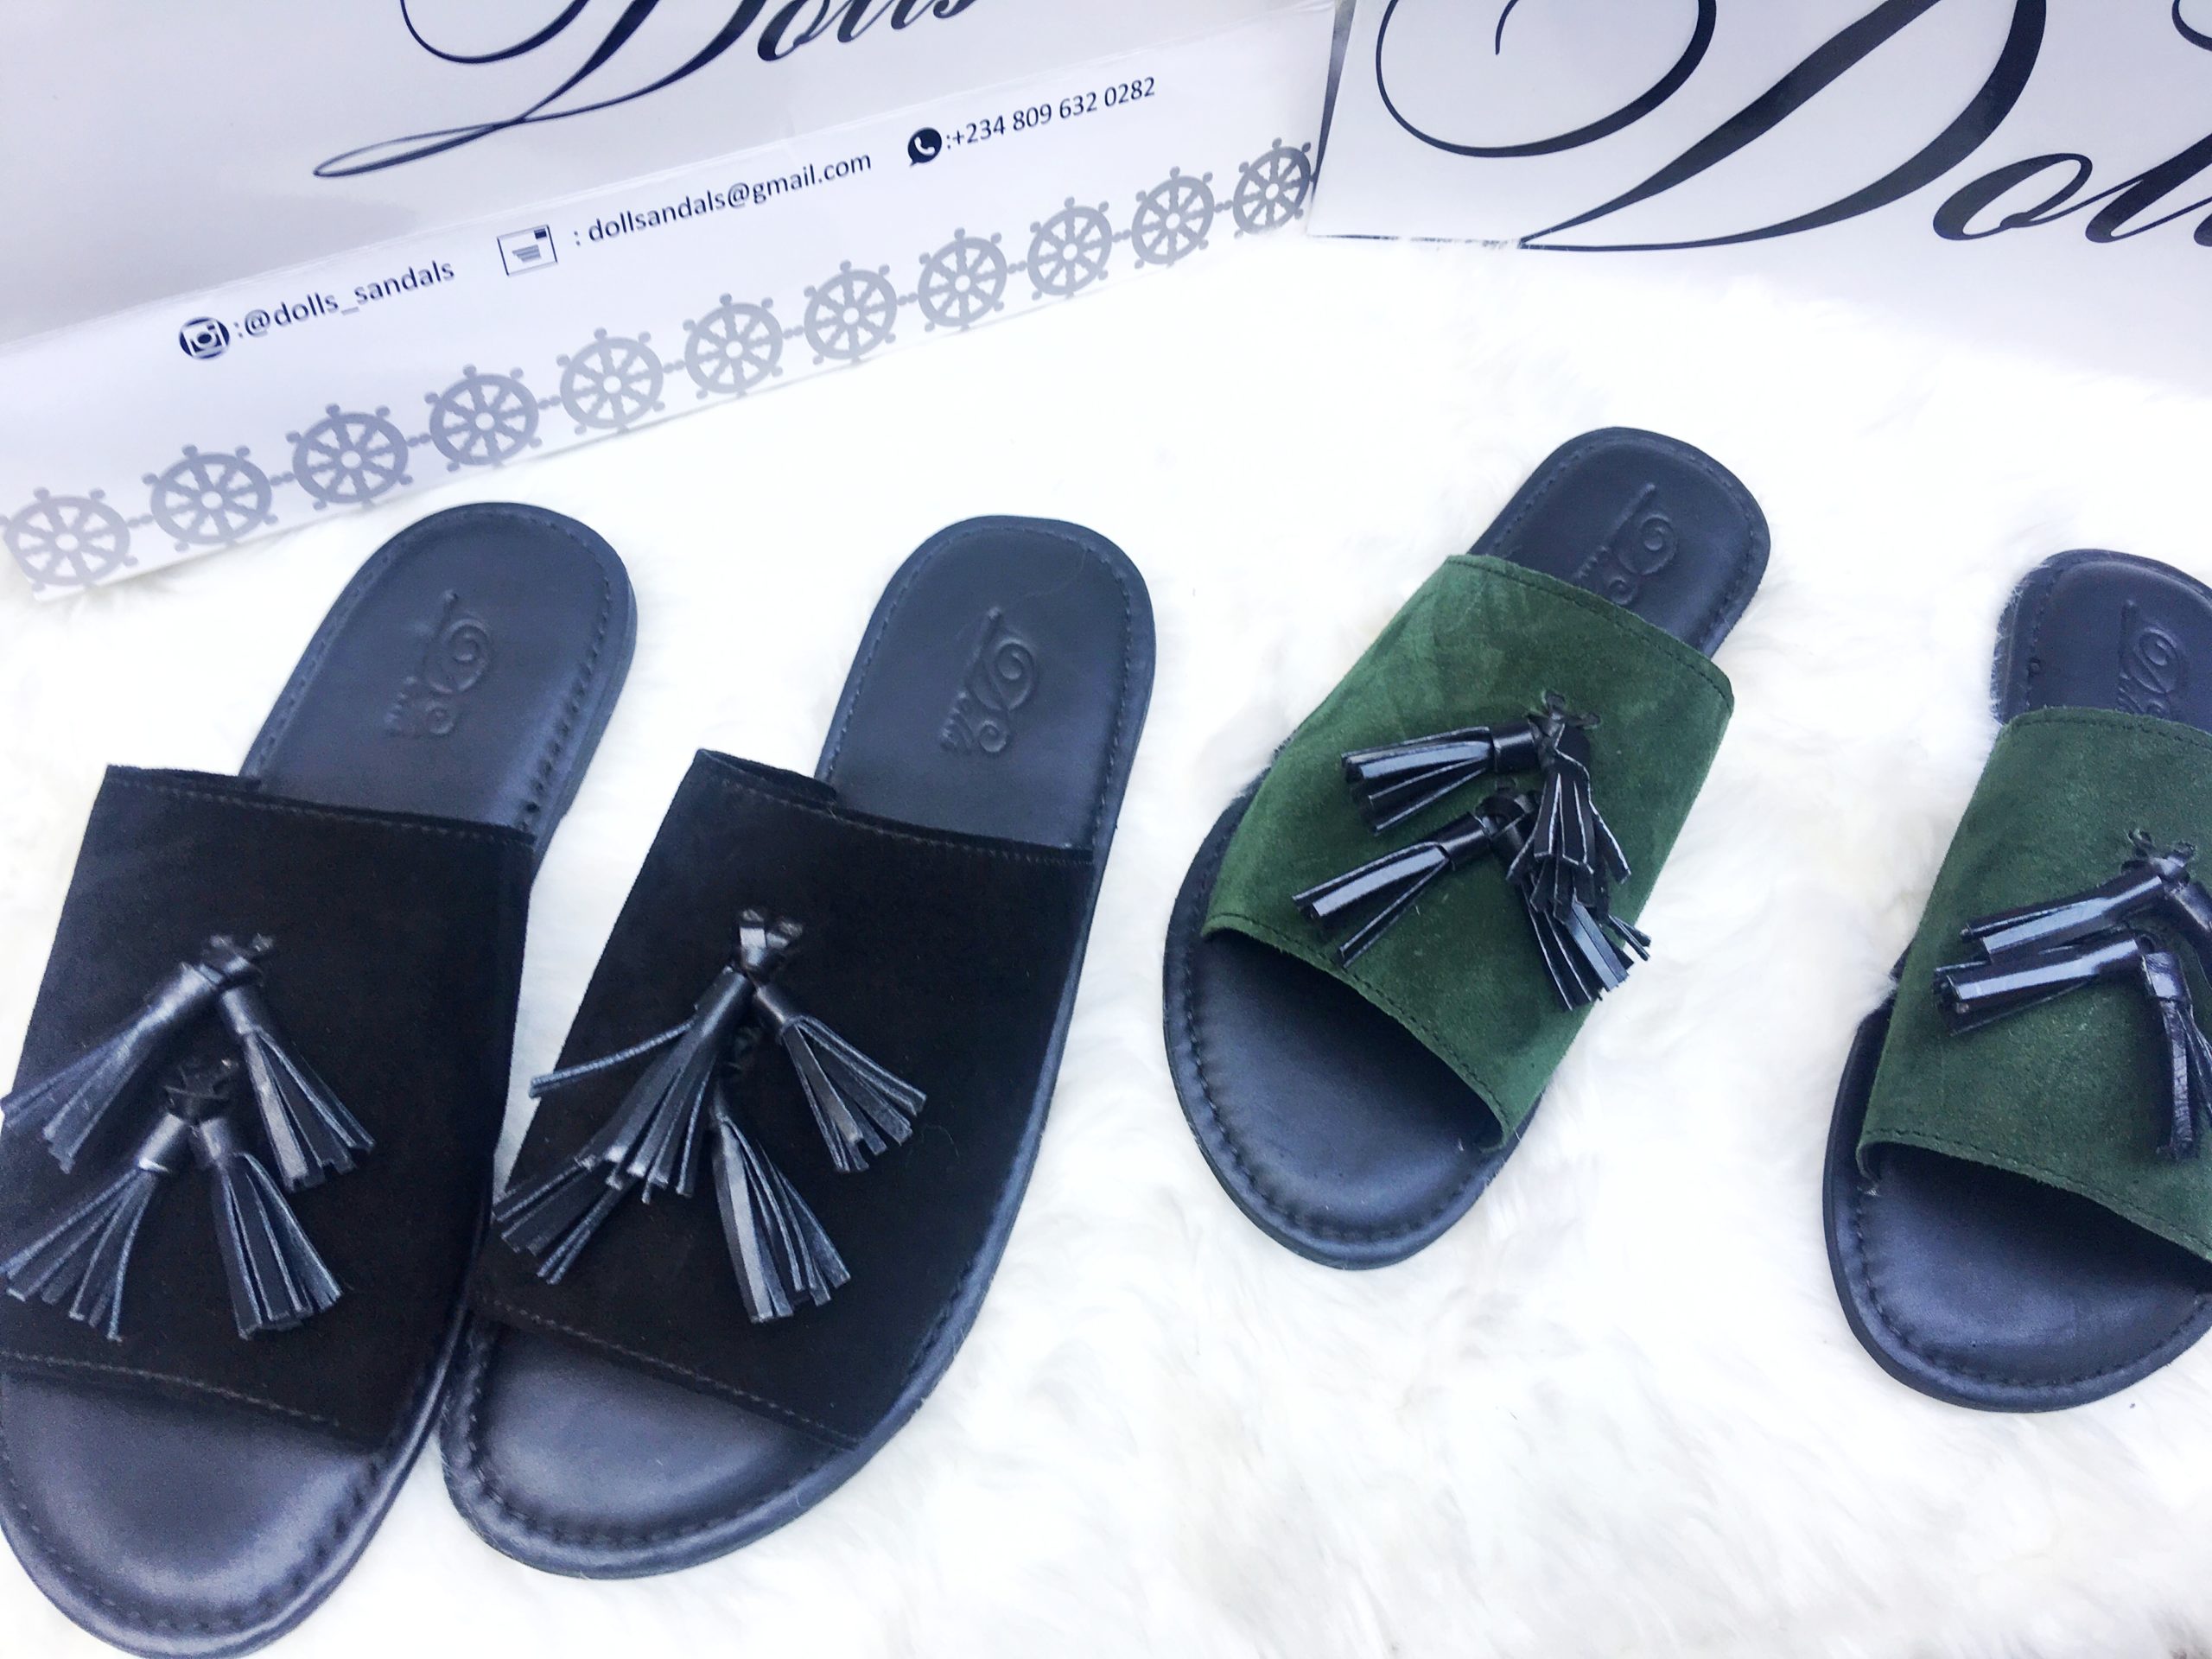 Double Tassels Slides - Dolls Leather Products